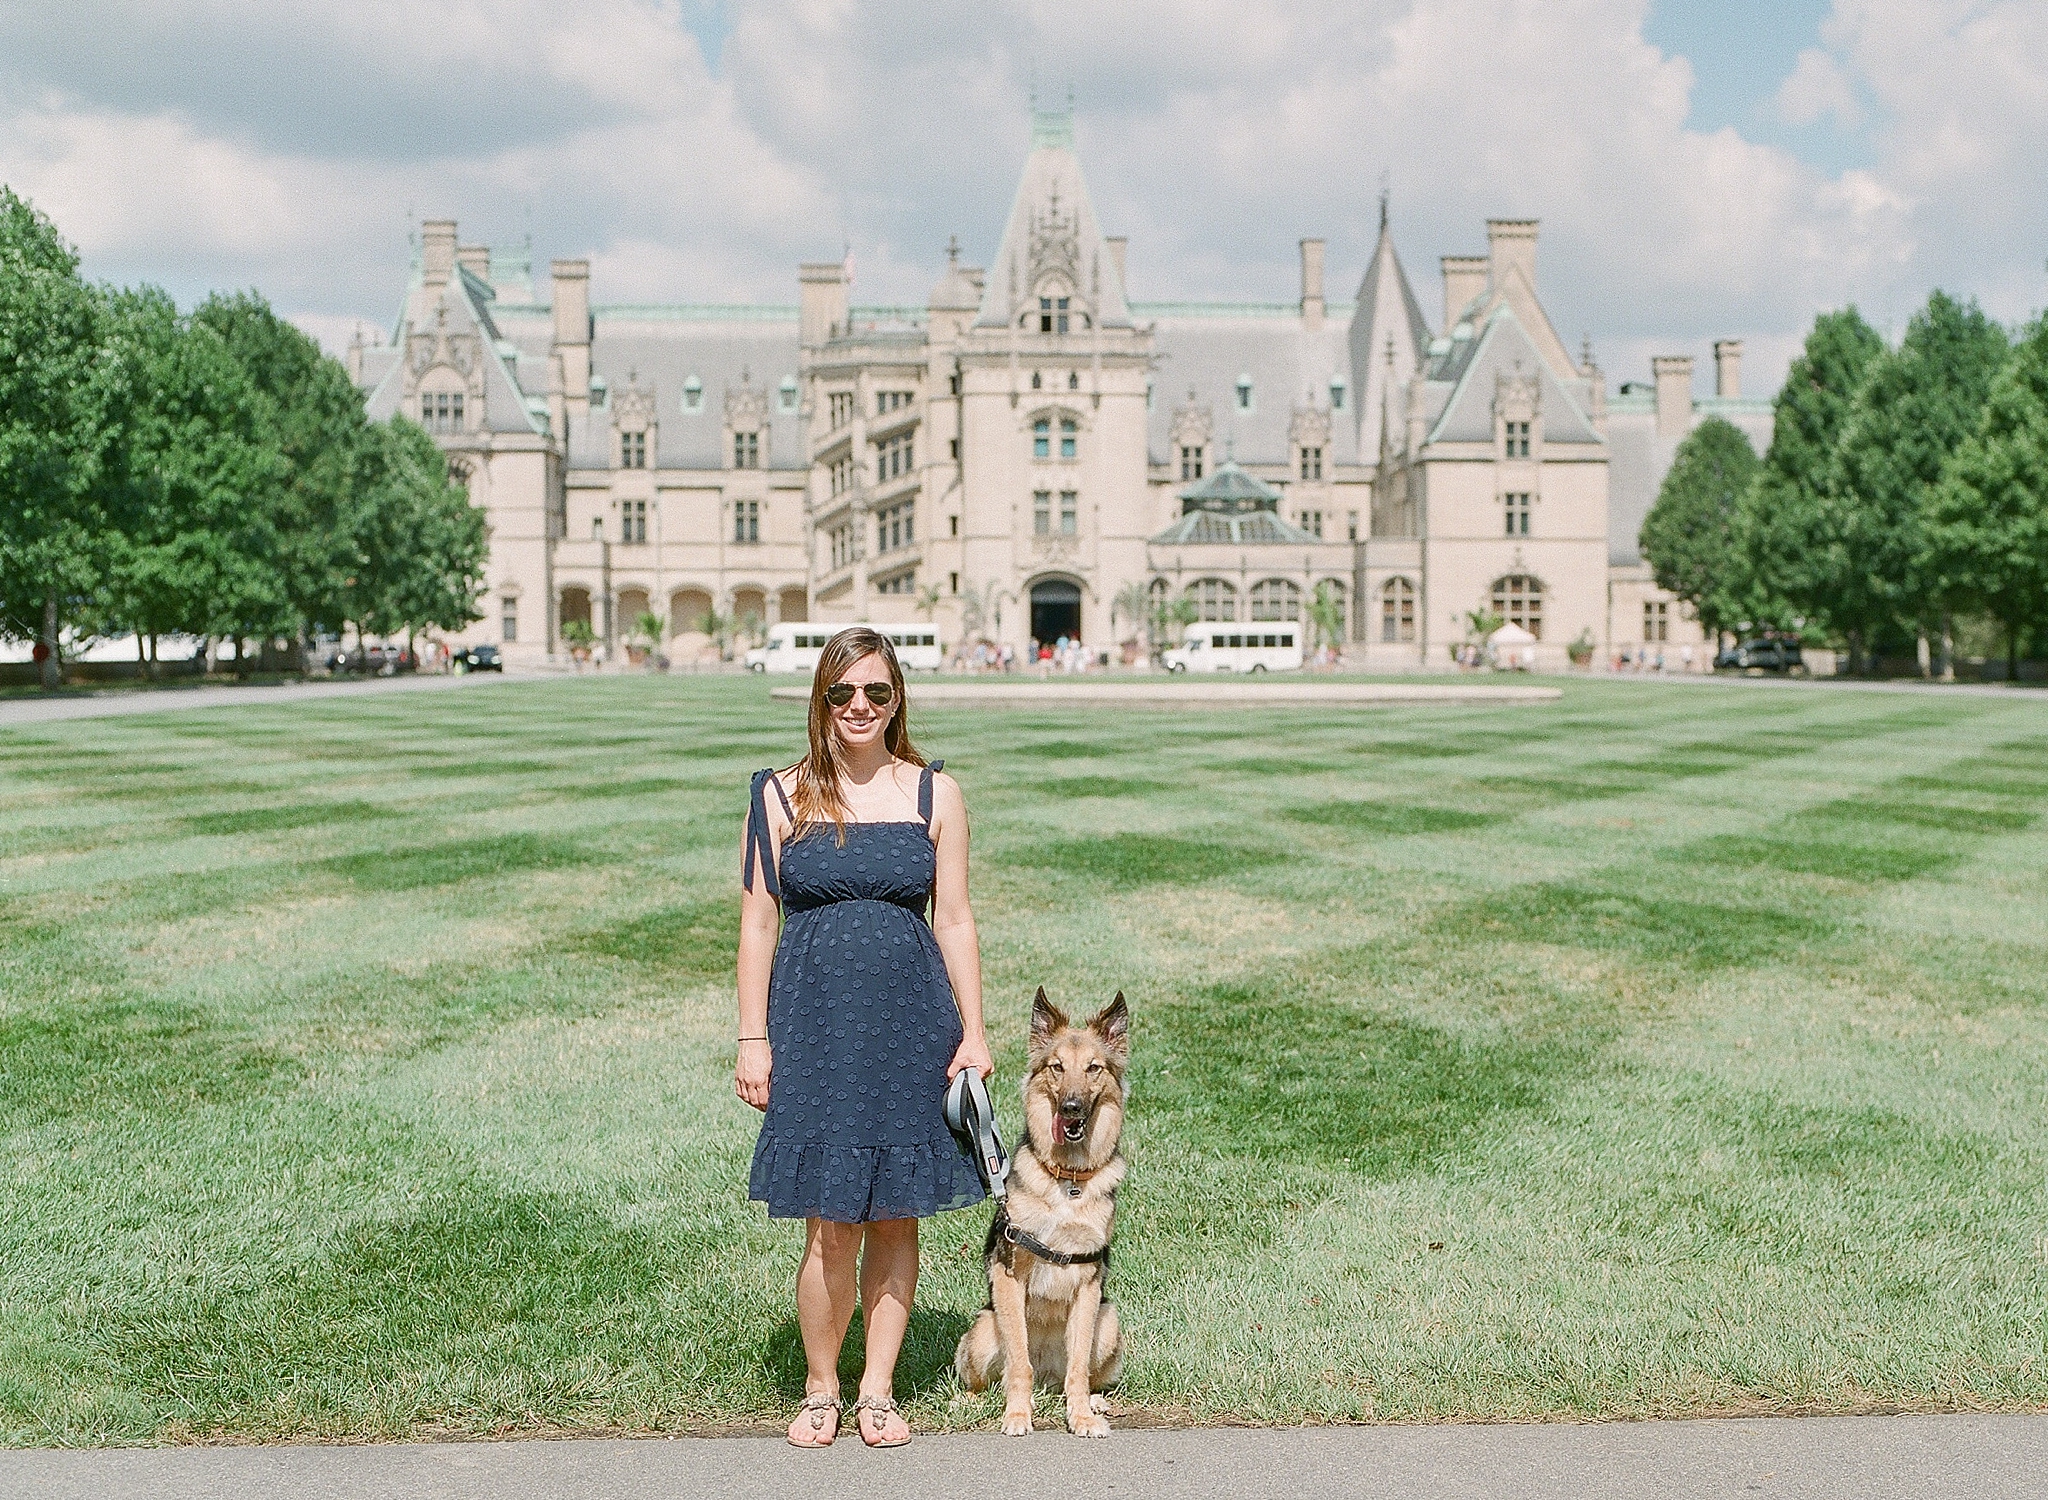 Fine art travel photography from a Washington, DC wedding photographer's vacation to Asheville, NC. Includes stops at Biltmore Estate and the Blue Ridge Parkway.